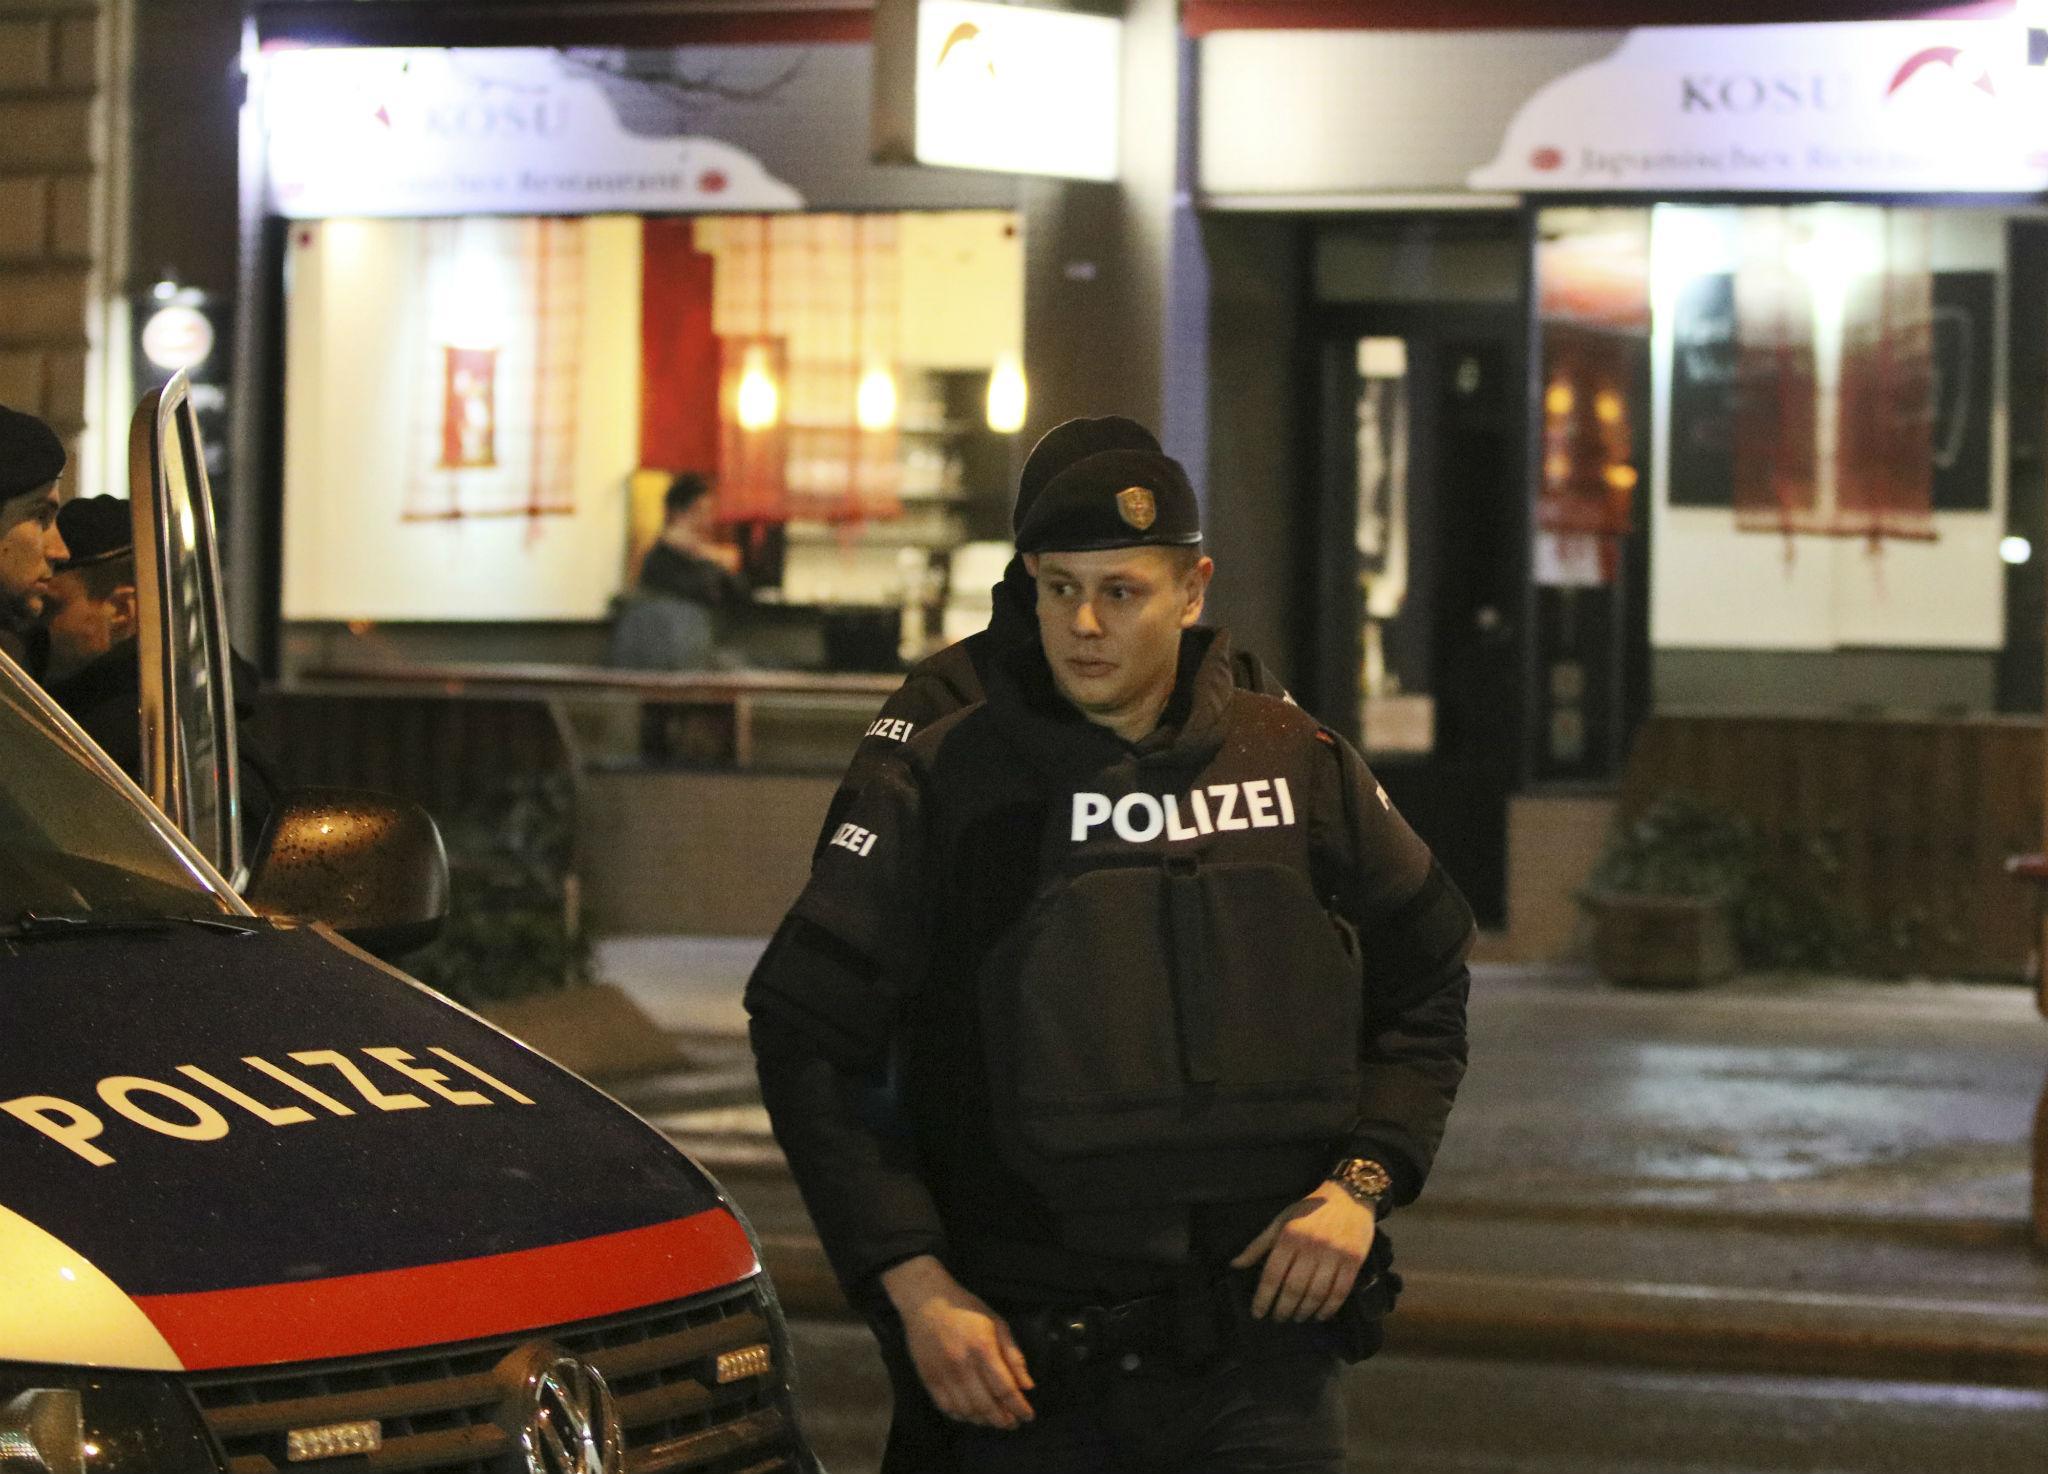 Four seriously wounded in Austria stabbings